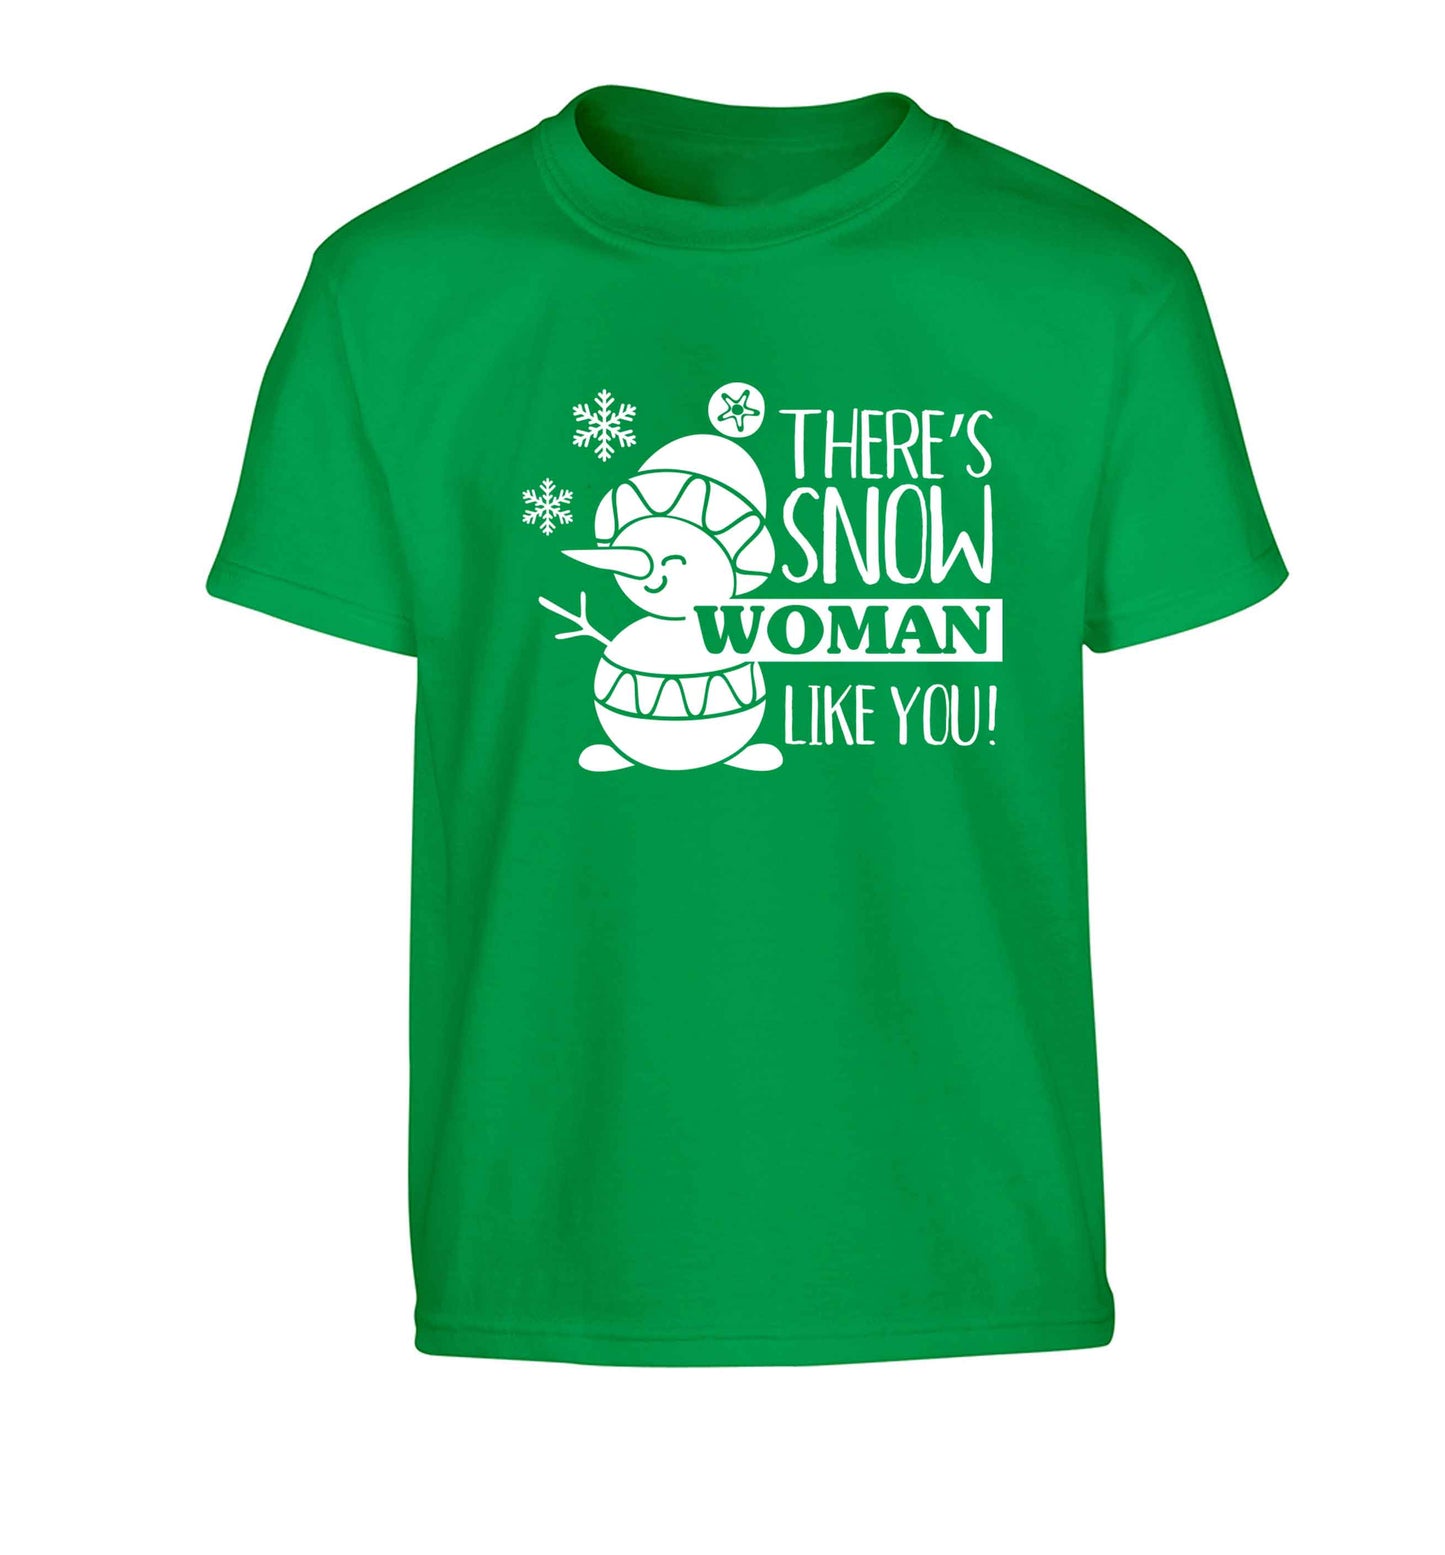 There's snow woman like you Children's green Tshirt 12-13 Years